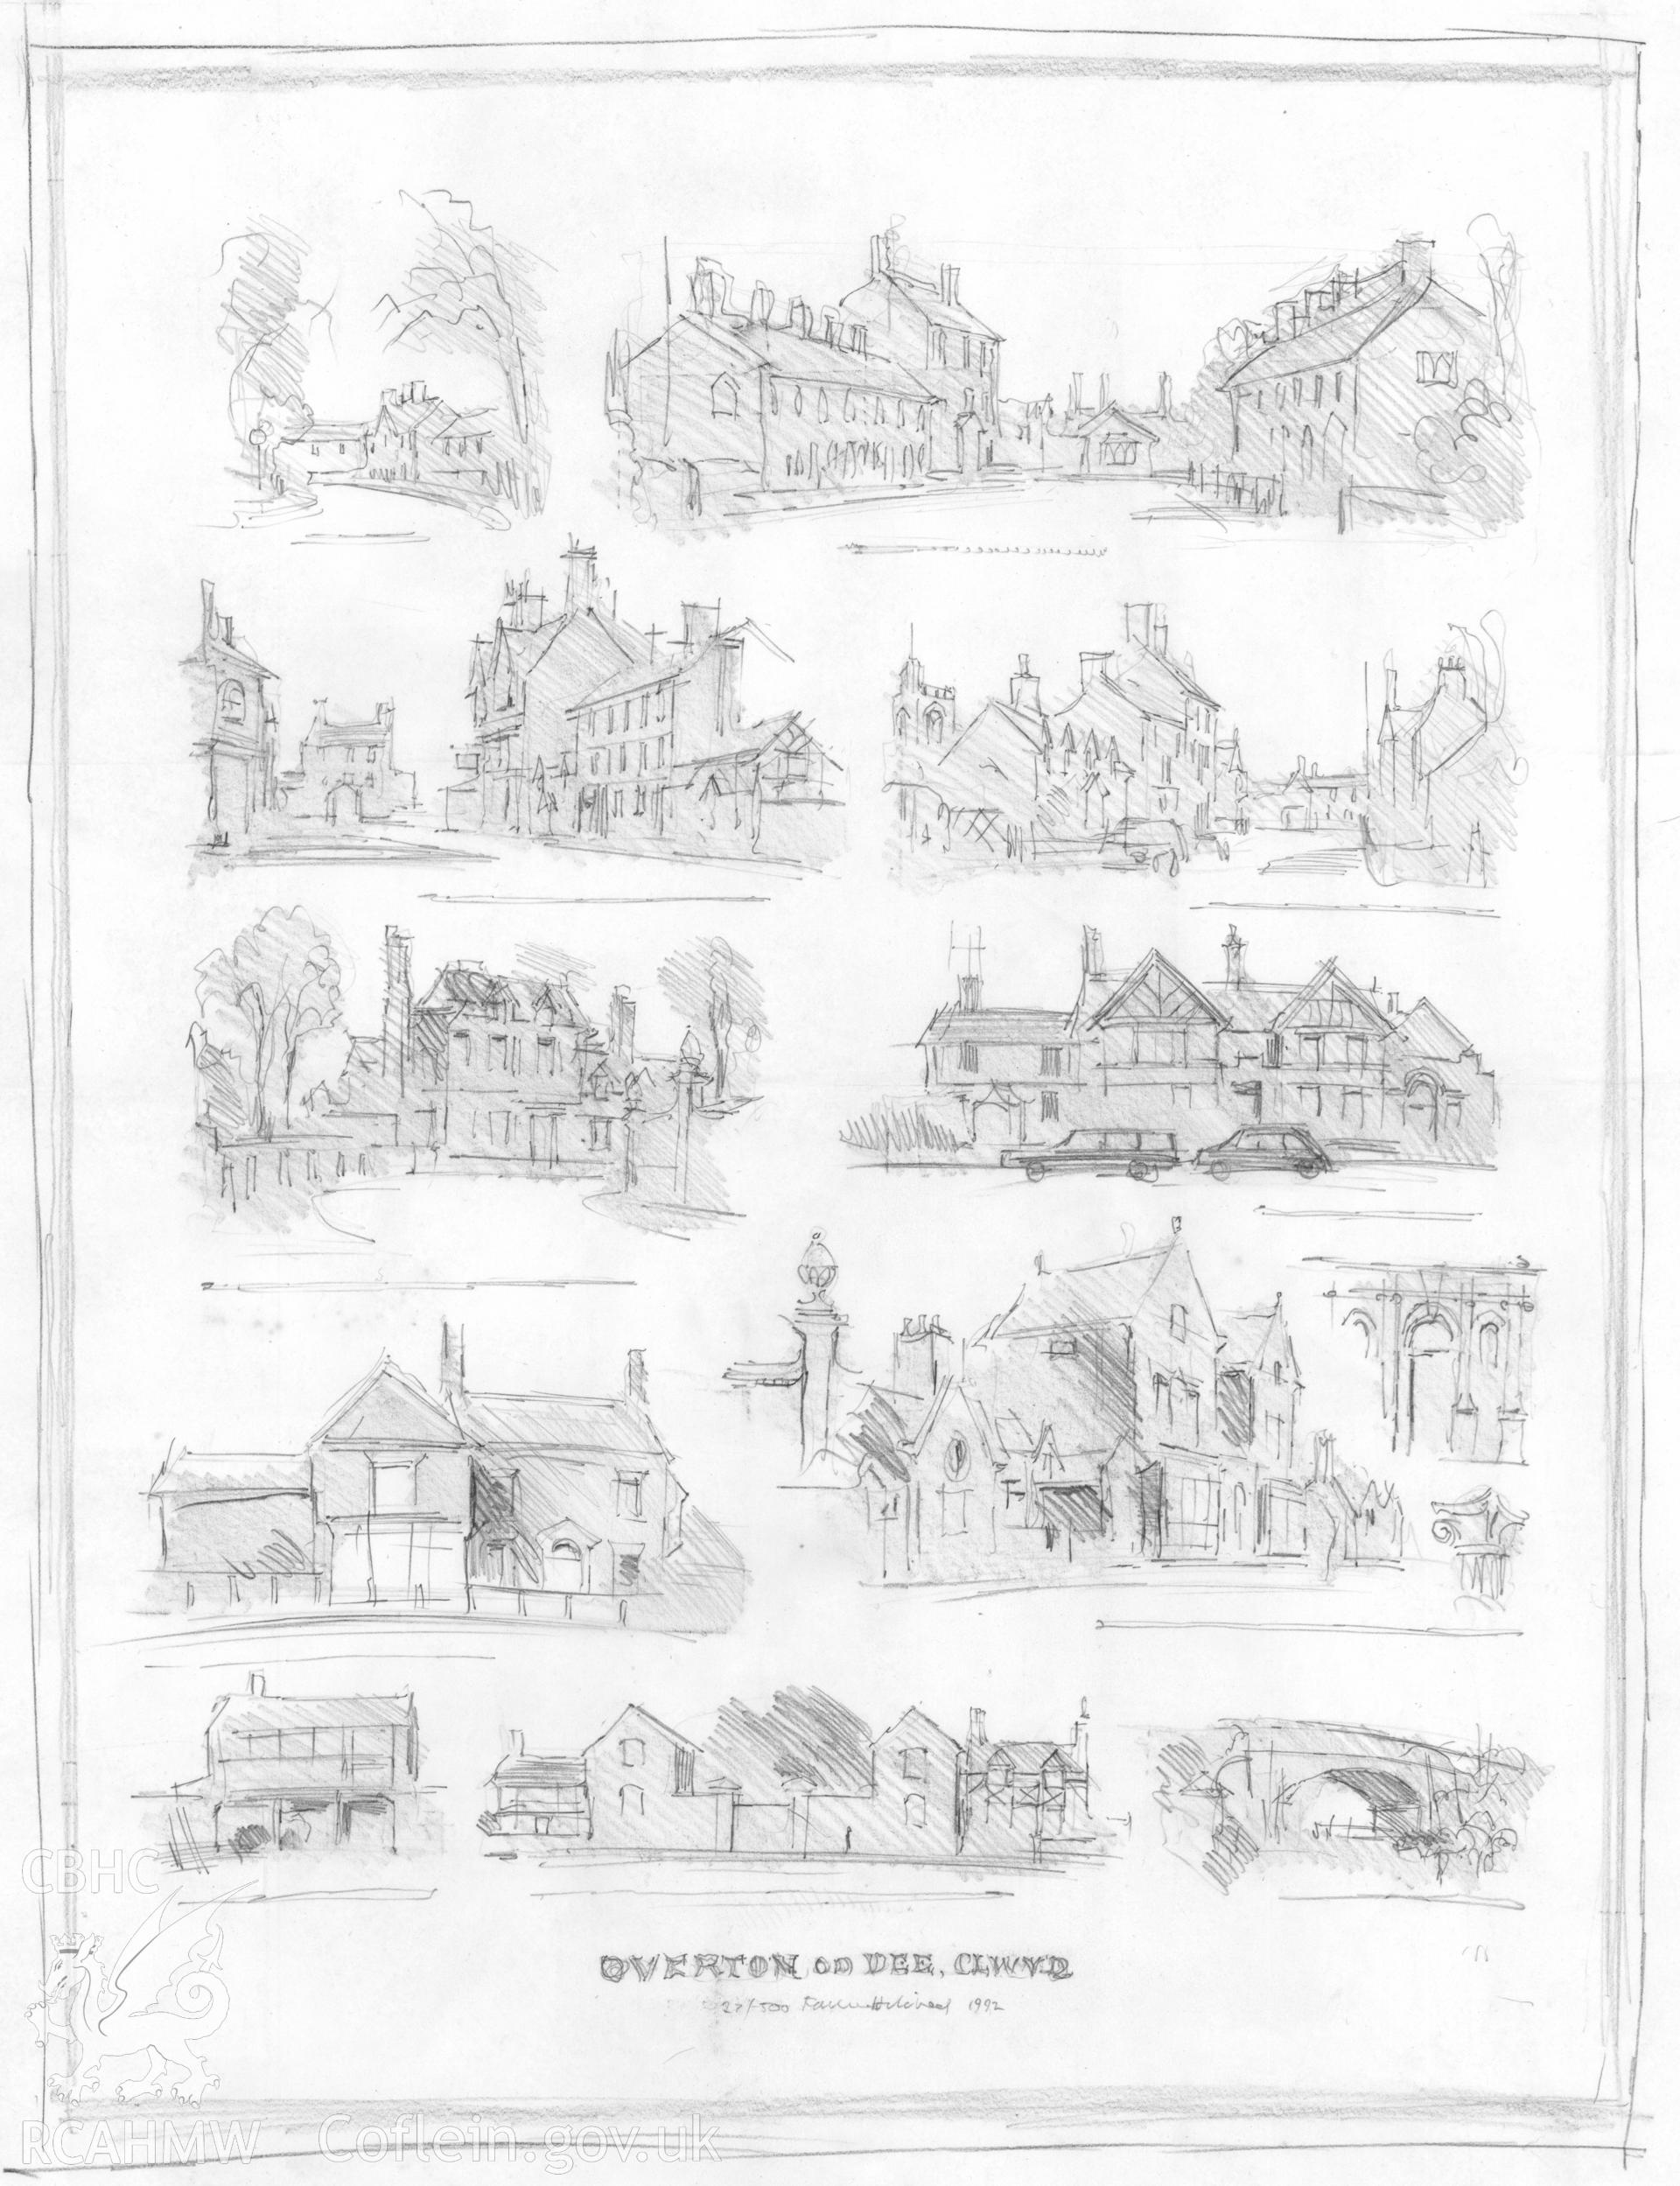 Overton-on-Dee: (pencil) 'Design for Composite' drawing.